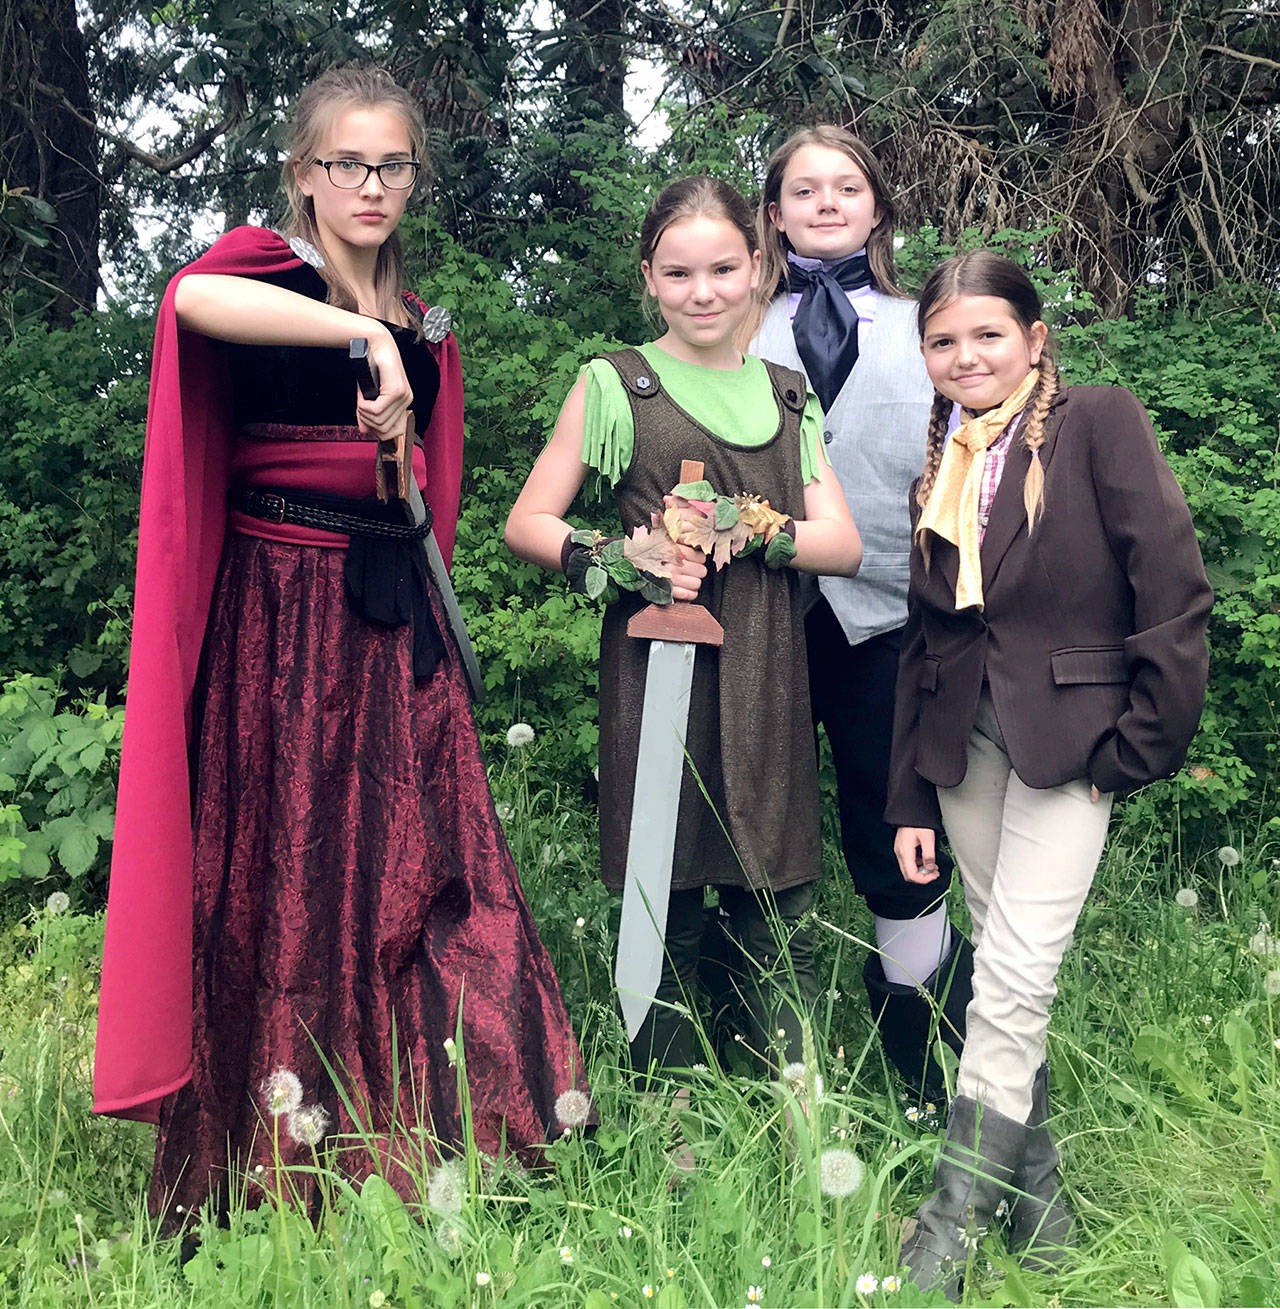 From left, Gretel Maberry as Hippolyta, Ally Ferens as Moth, Sierra Douglas as Egeus and Lavender Douglas as Tom Snout.